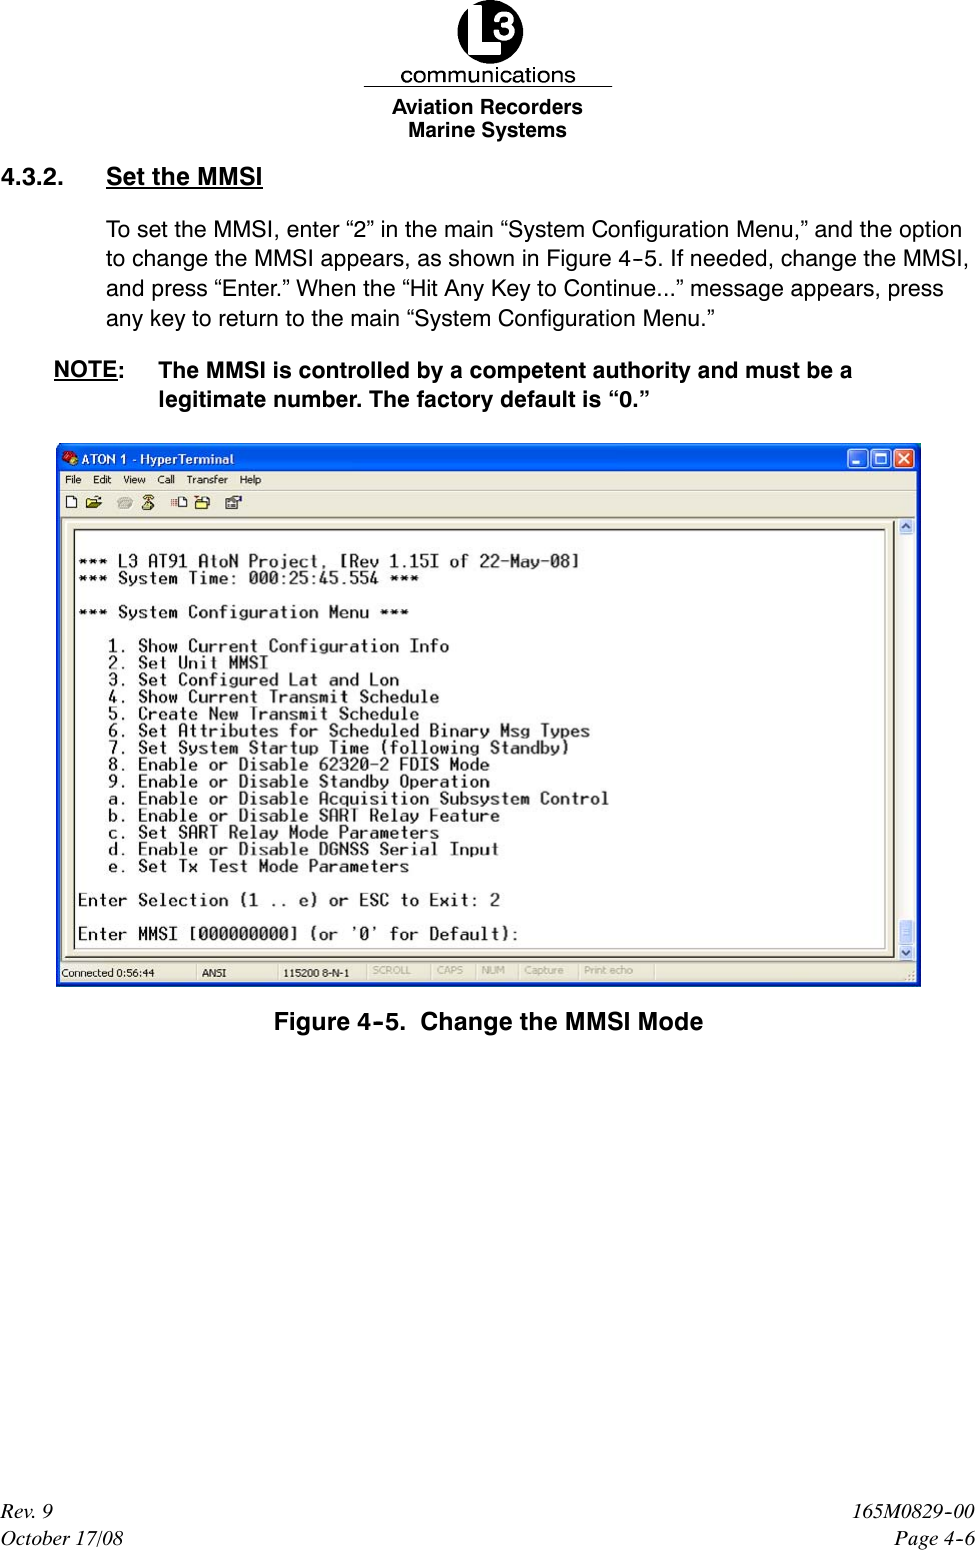 Marine SystemsAviation RecordersPage 4--6165M0829--00Rev. 9October 17/084.3.2. Set the MMSITo set the MMSI, enter “2” in the main “System Configuration Menu,” and the optionto change the MMSI appears, as shown in Figure 4--5. If needed, change the MMSI,and press “Enter.” When the “Hit Any Key to Continue...” message appears, pressany key to return to the main “System Configuration Menu.”NOTE: The MMSI is controlled by a competent authority and must be alegitimate number. The factory default is “0.”Figure 4--5. Change the MMSI Mode